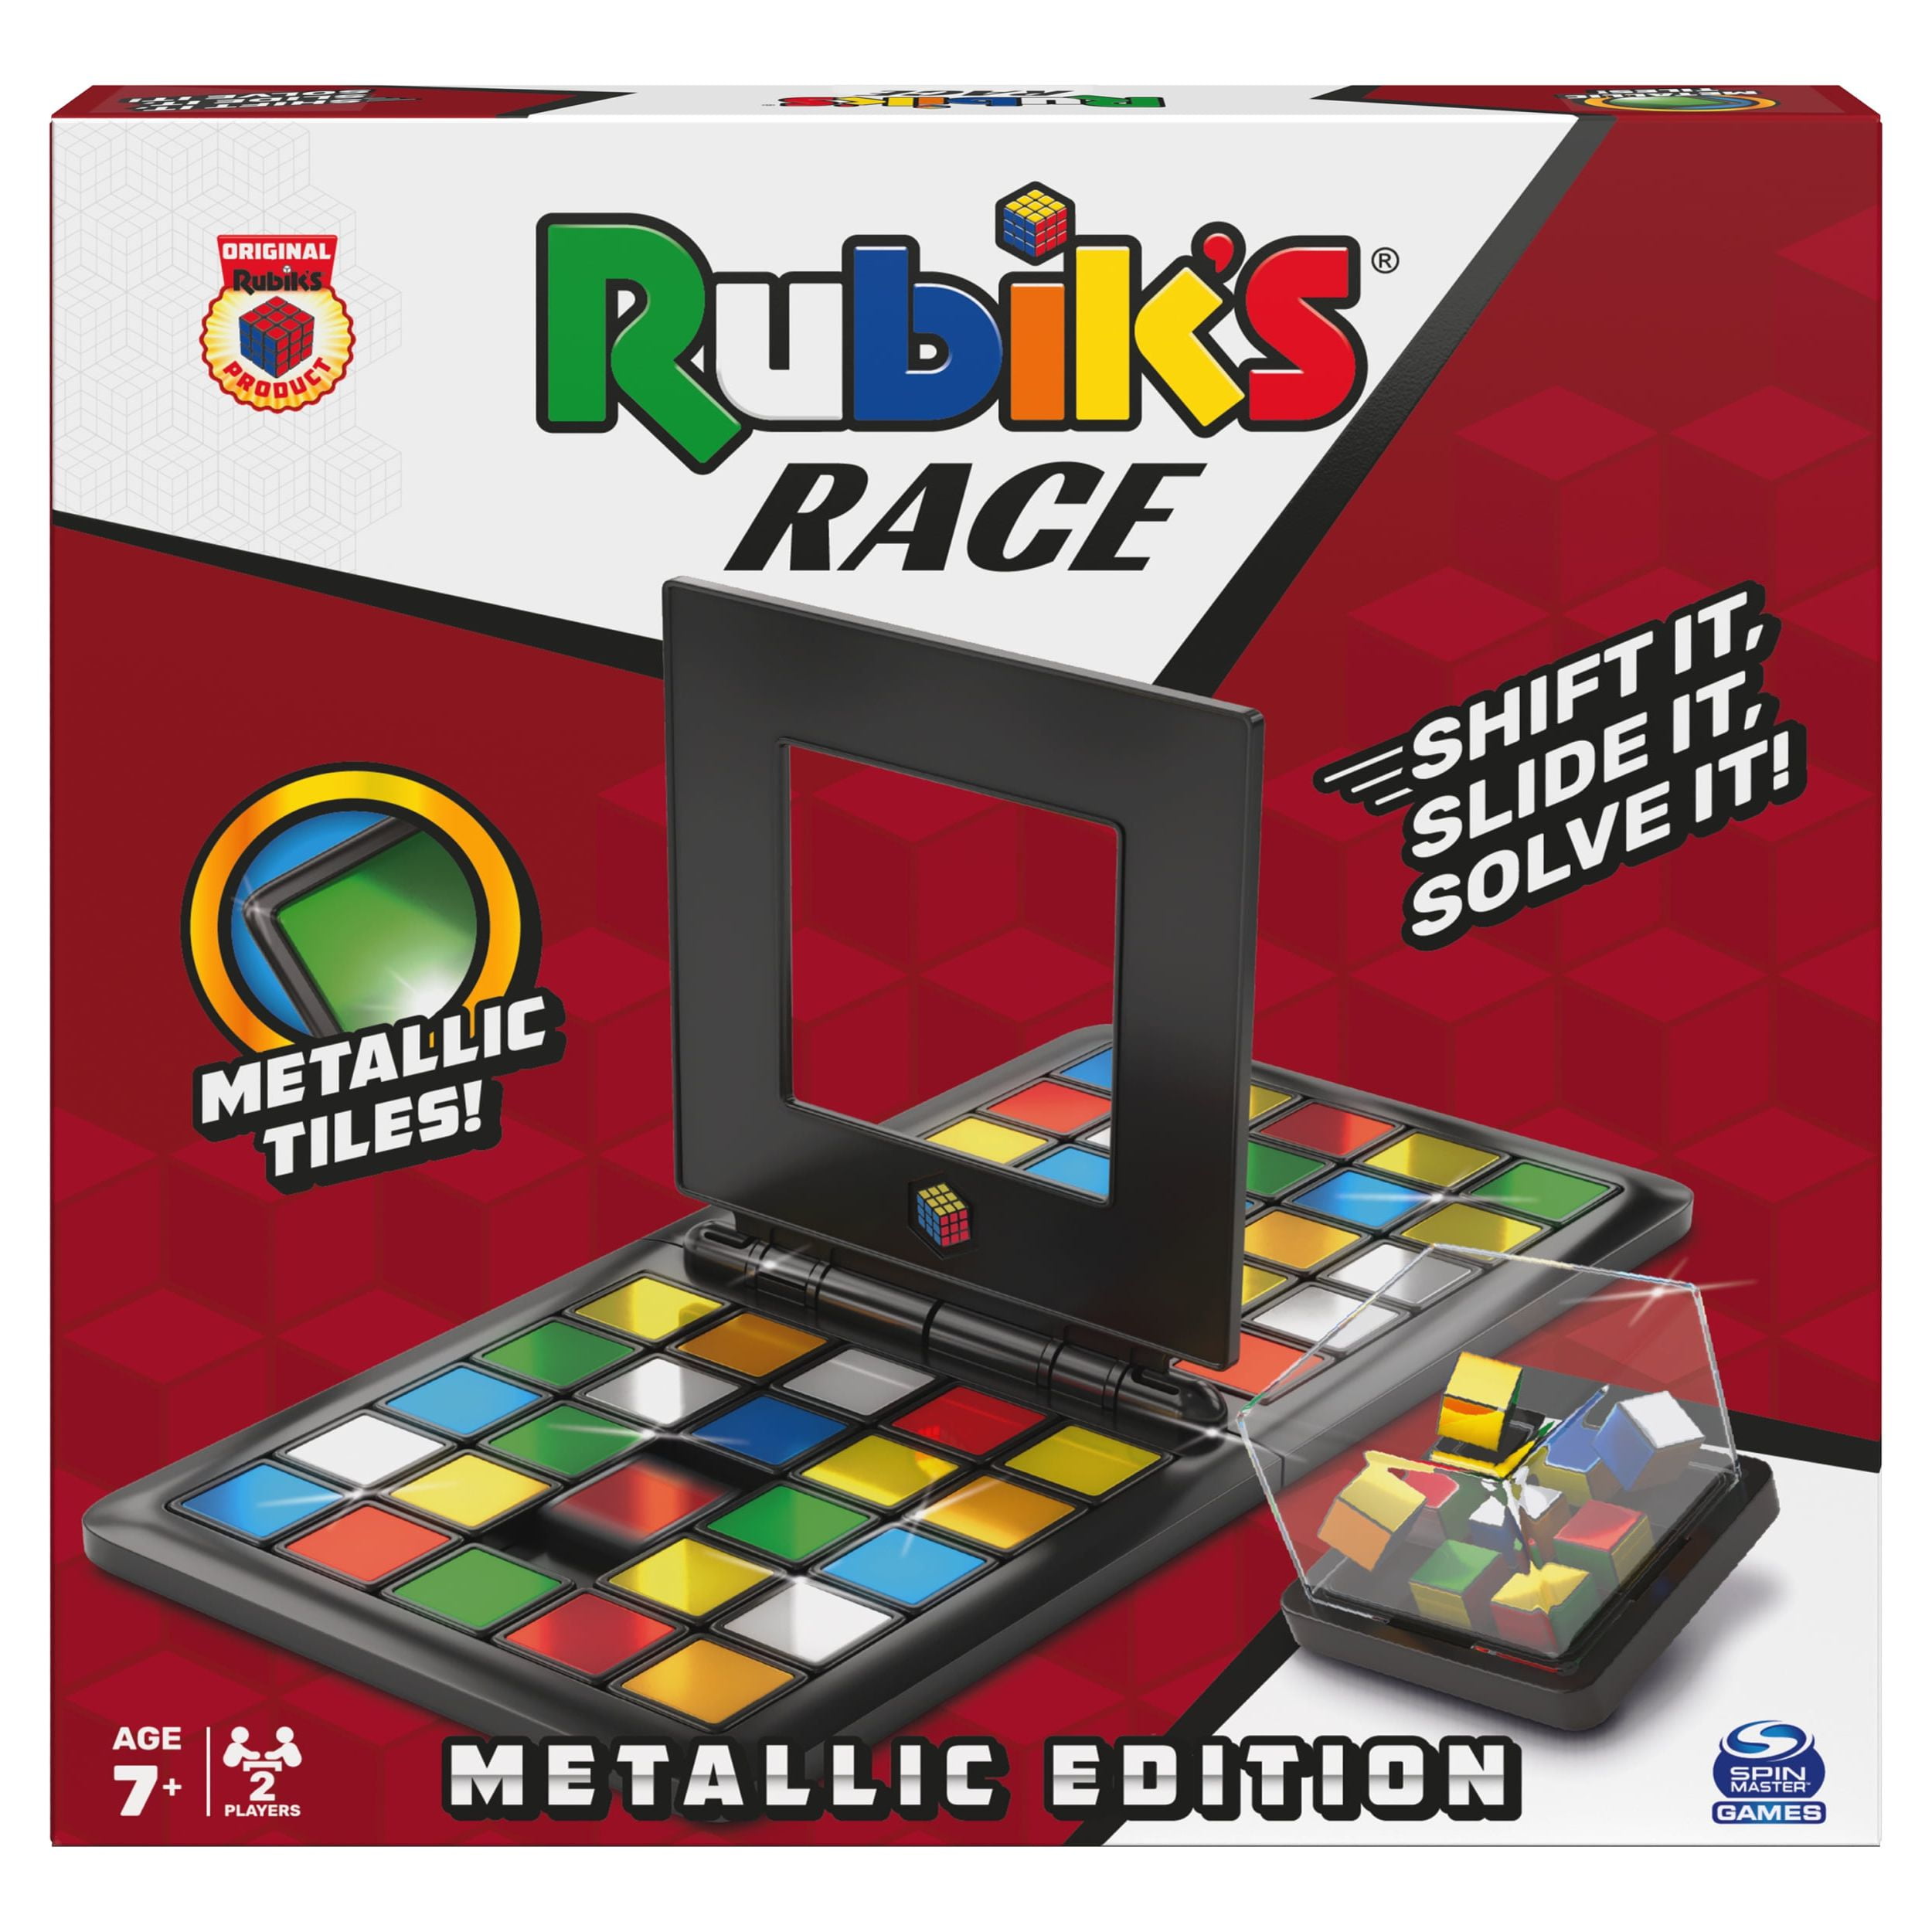 Maaron Block Rubiks Race Game - Block Rubiks Race Game . Buy Race cube toys  in India. shop for Maaron products in India.